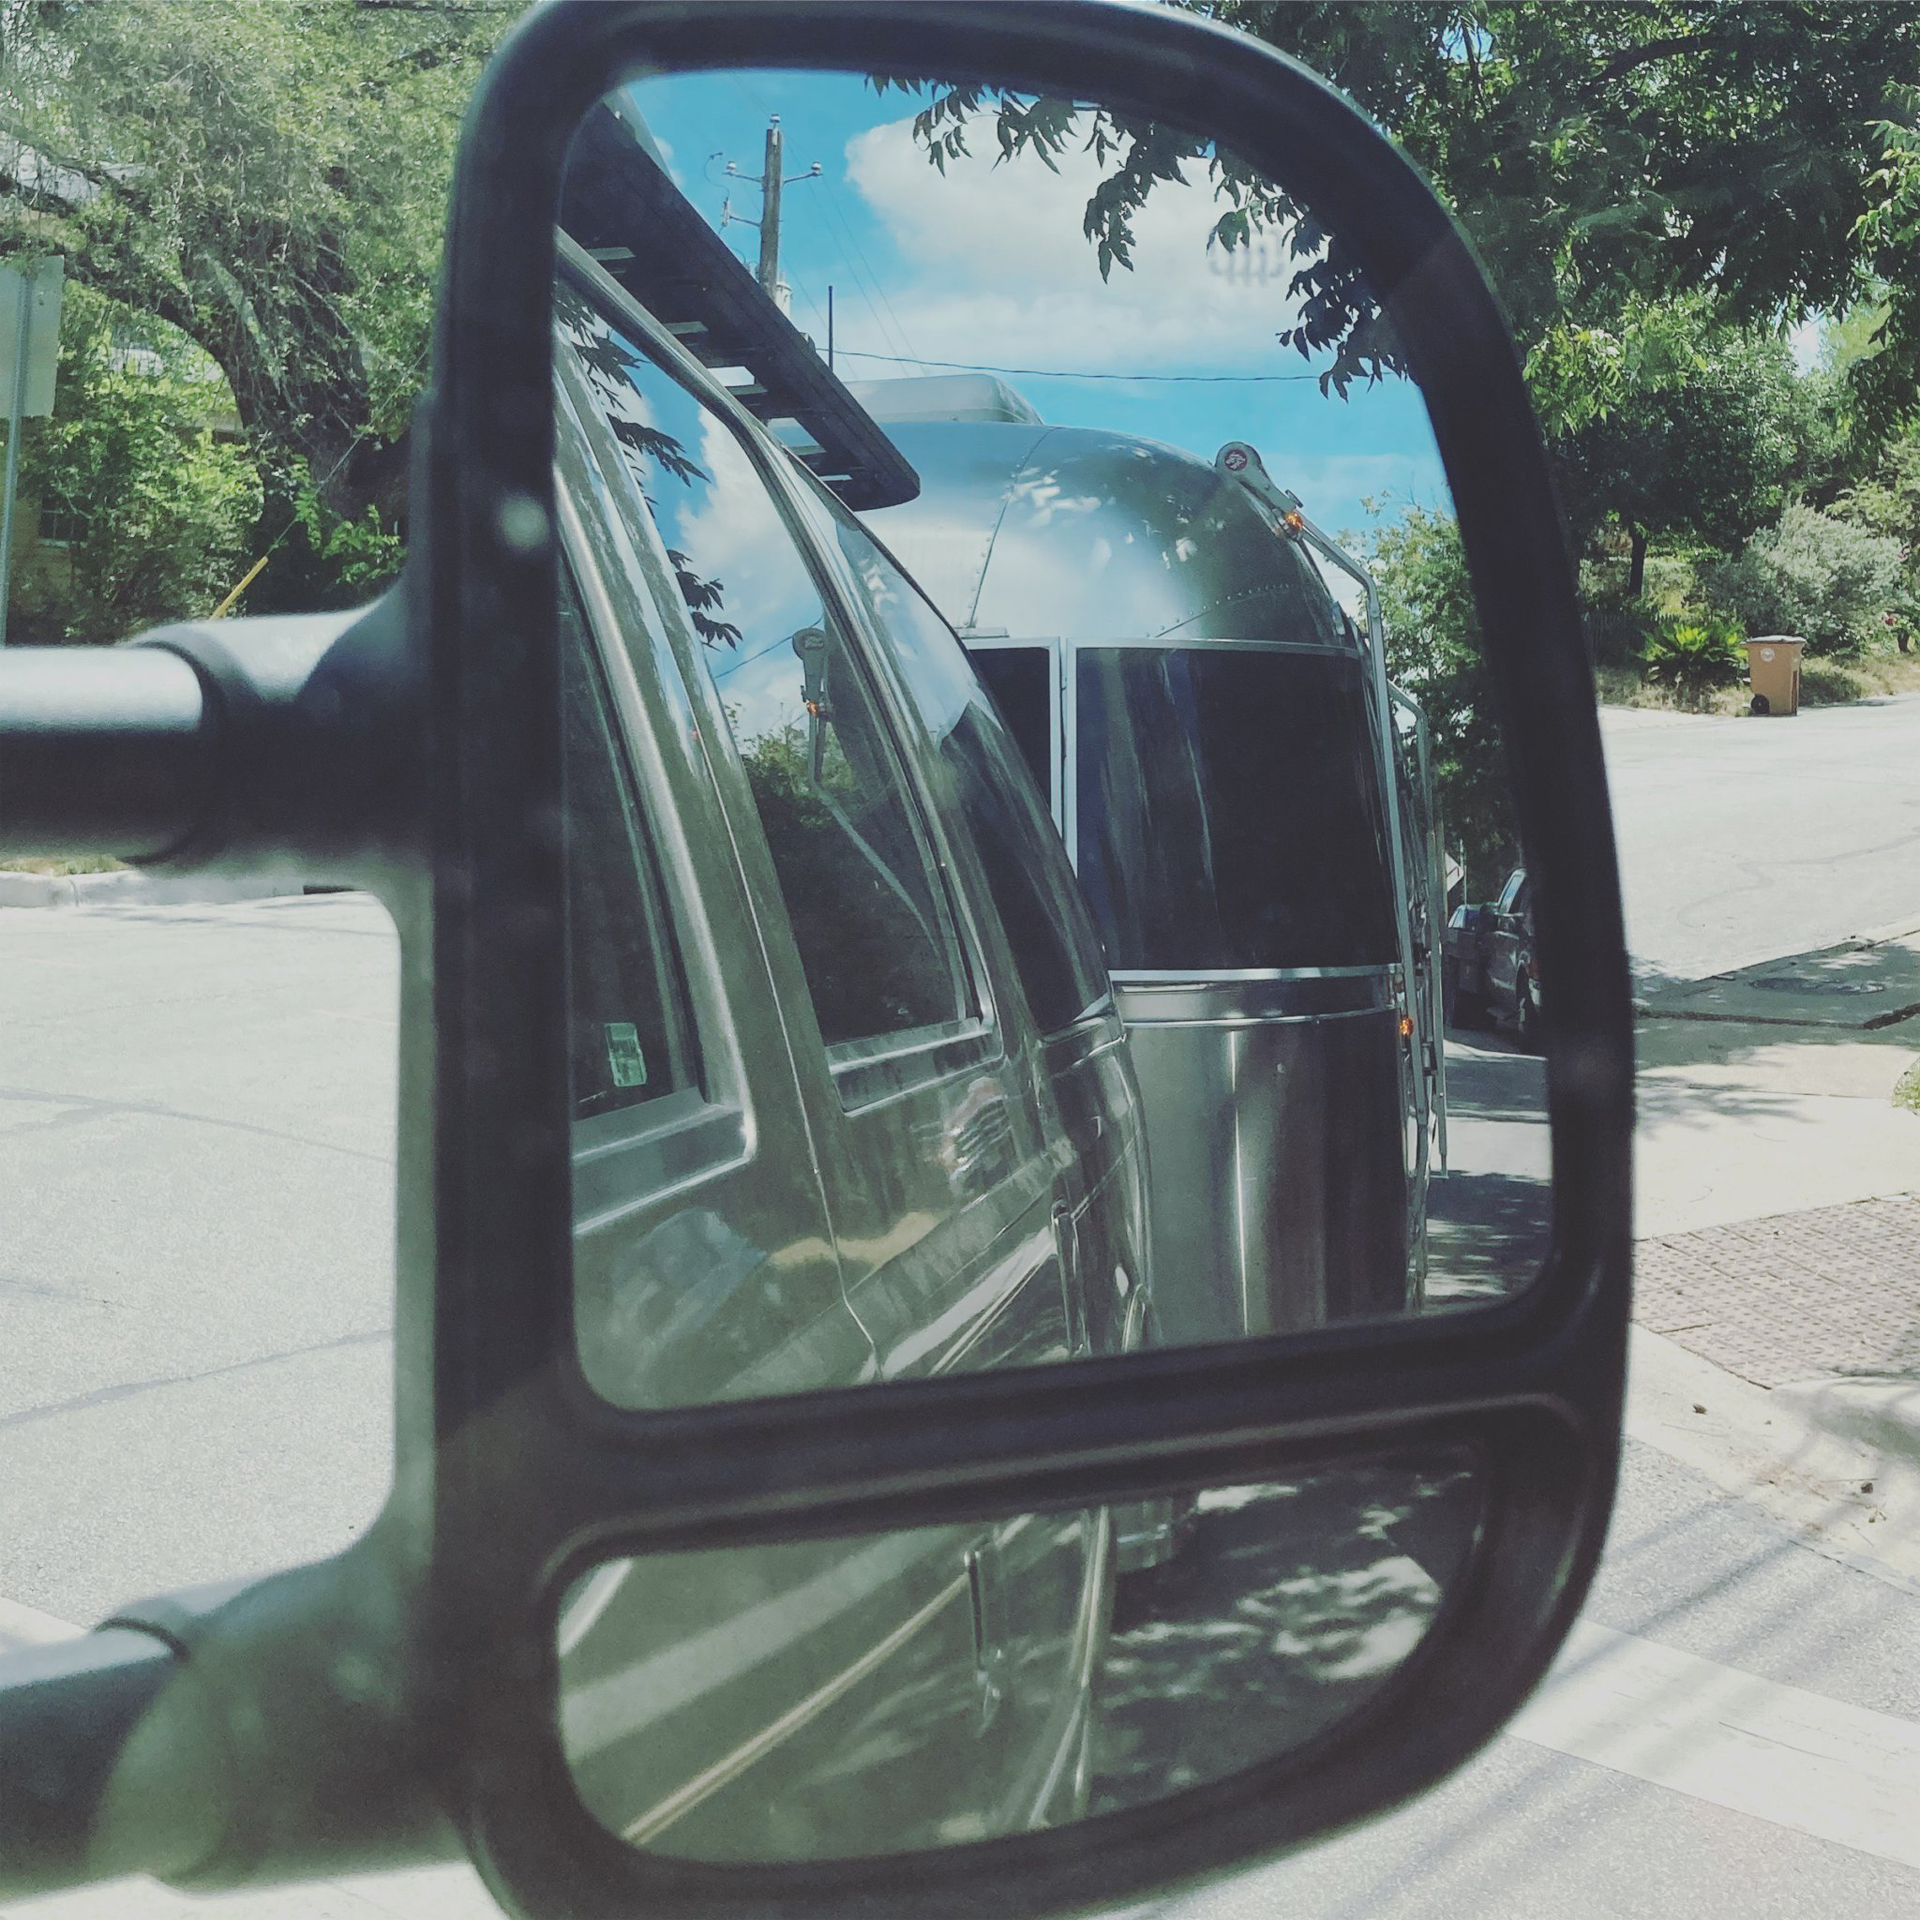 An airstream travel trailer in the mirror of a tow vehicle.